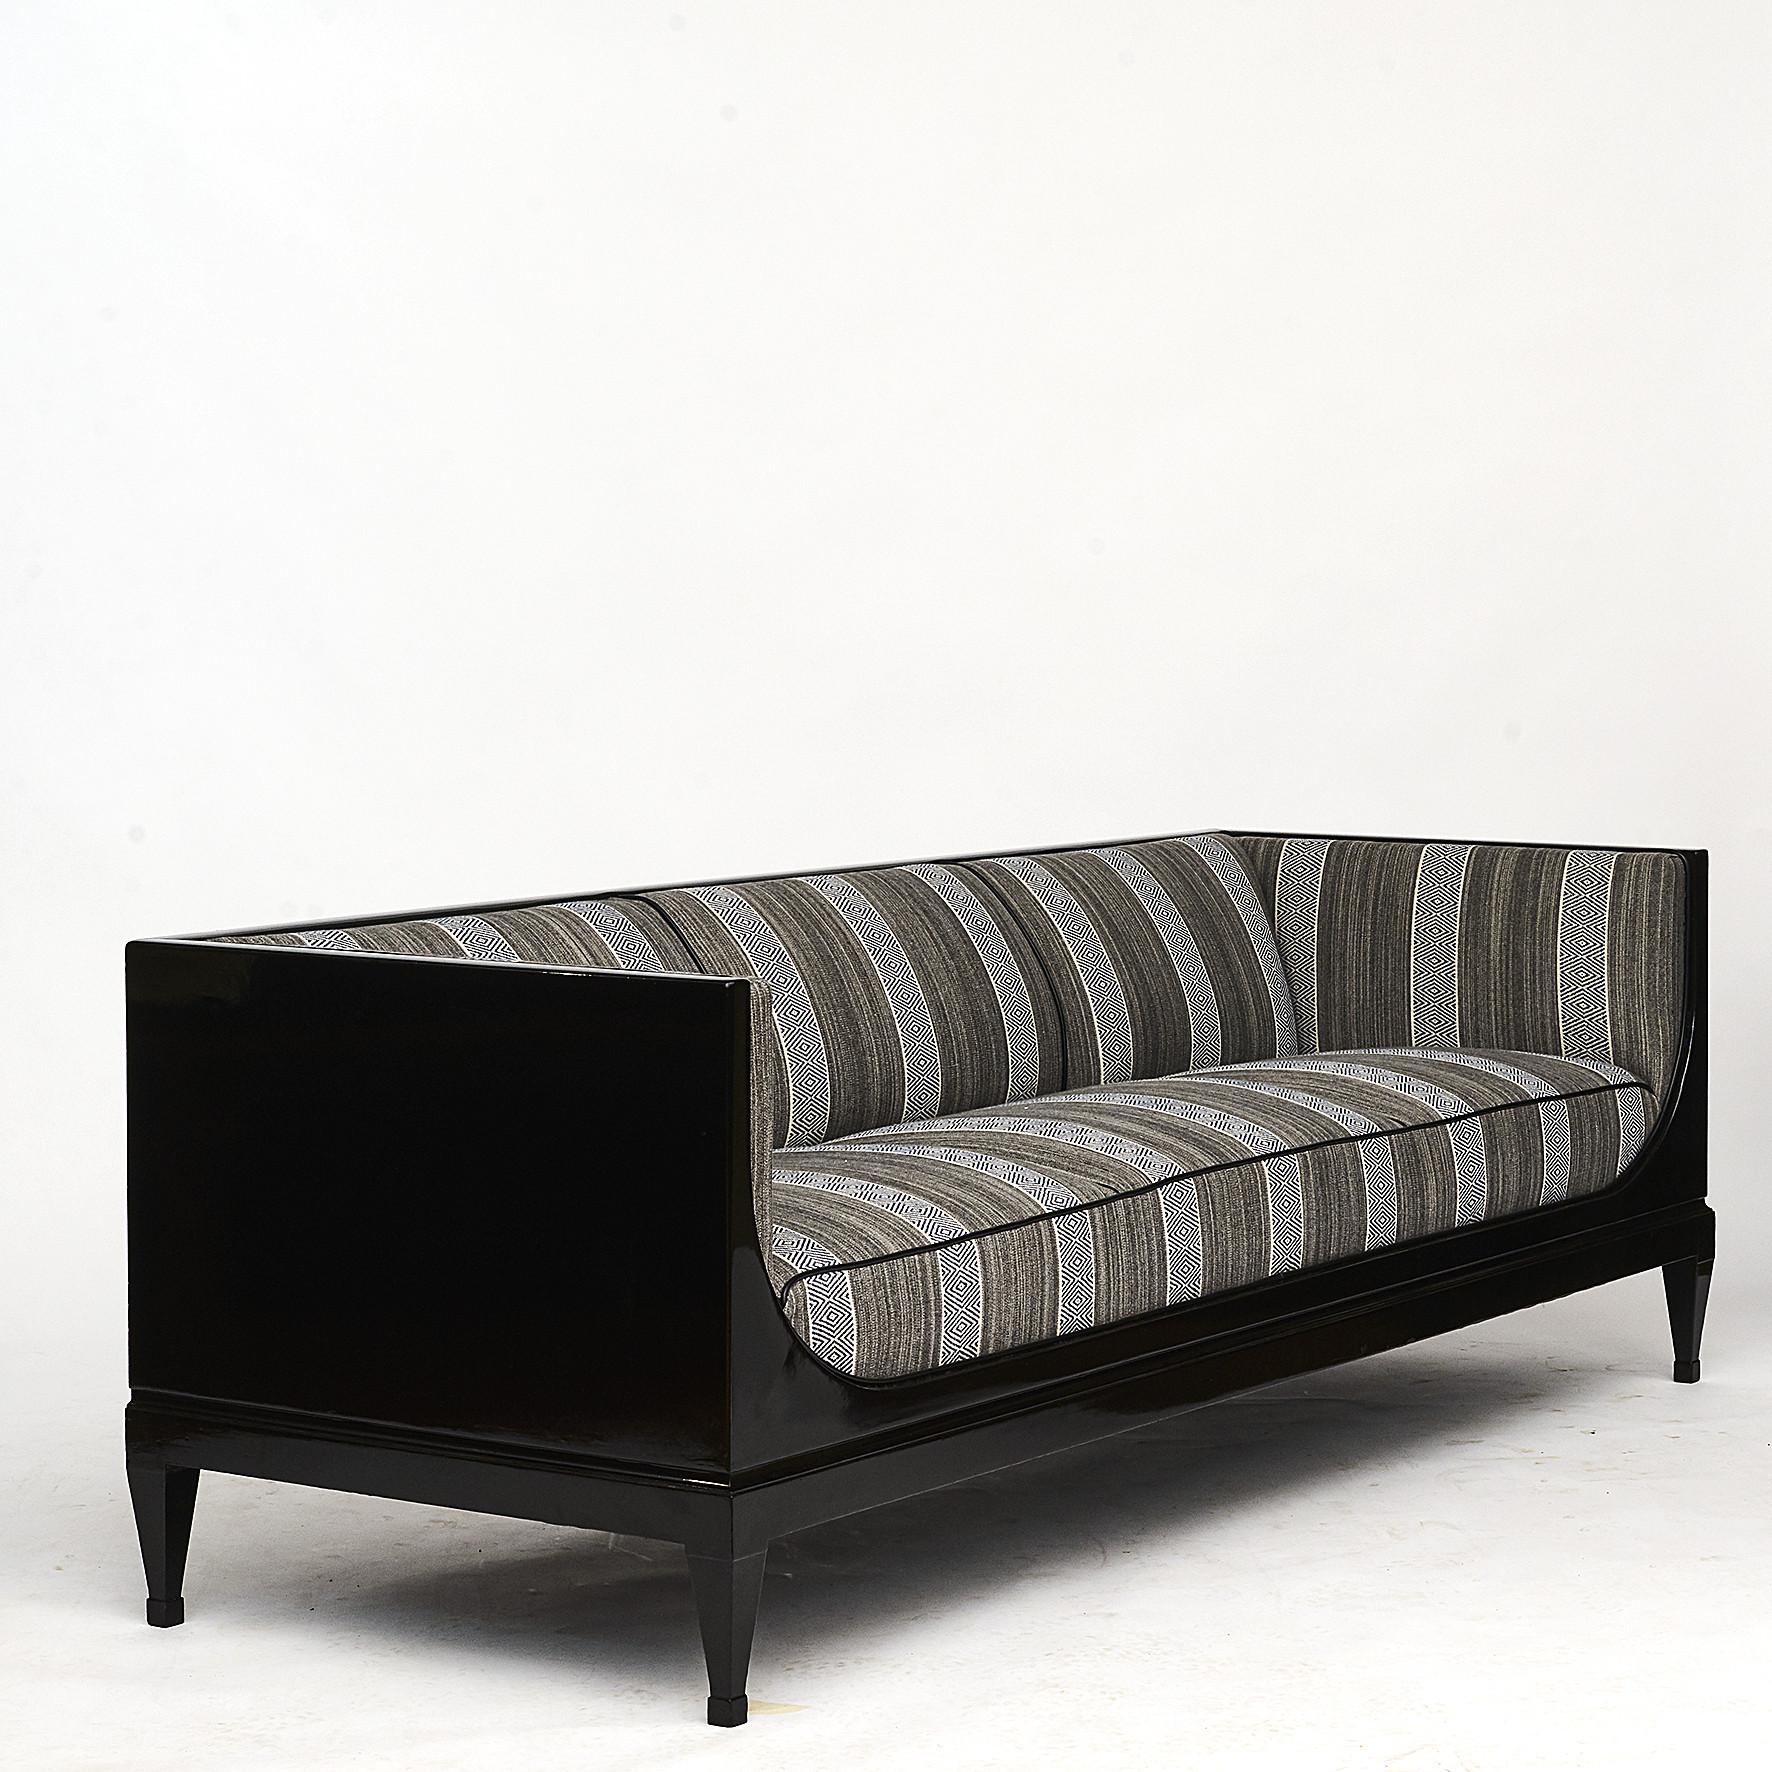 Frits Henningsen (1889-1965).
Free-standing box-shaped ebonized mahogany sofa designed by Frits Henningsen.
Front with rounded sleigh-shaped sides. Re-upholstered in fabric from Baker Threads.
Designed and produced in the 1940s in his own